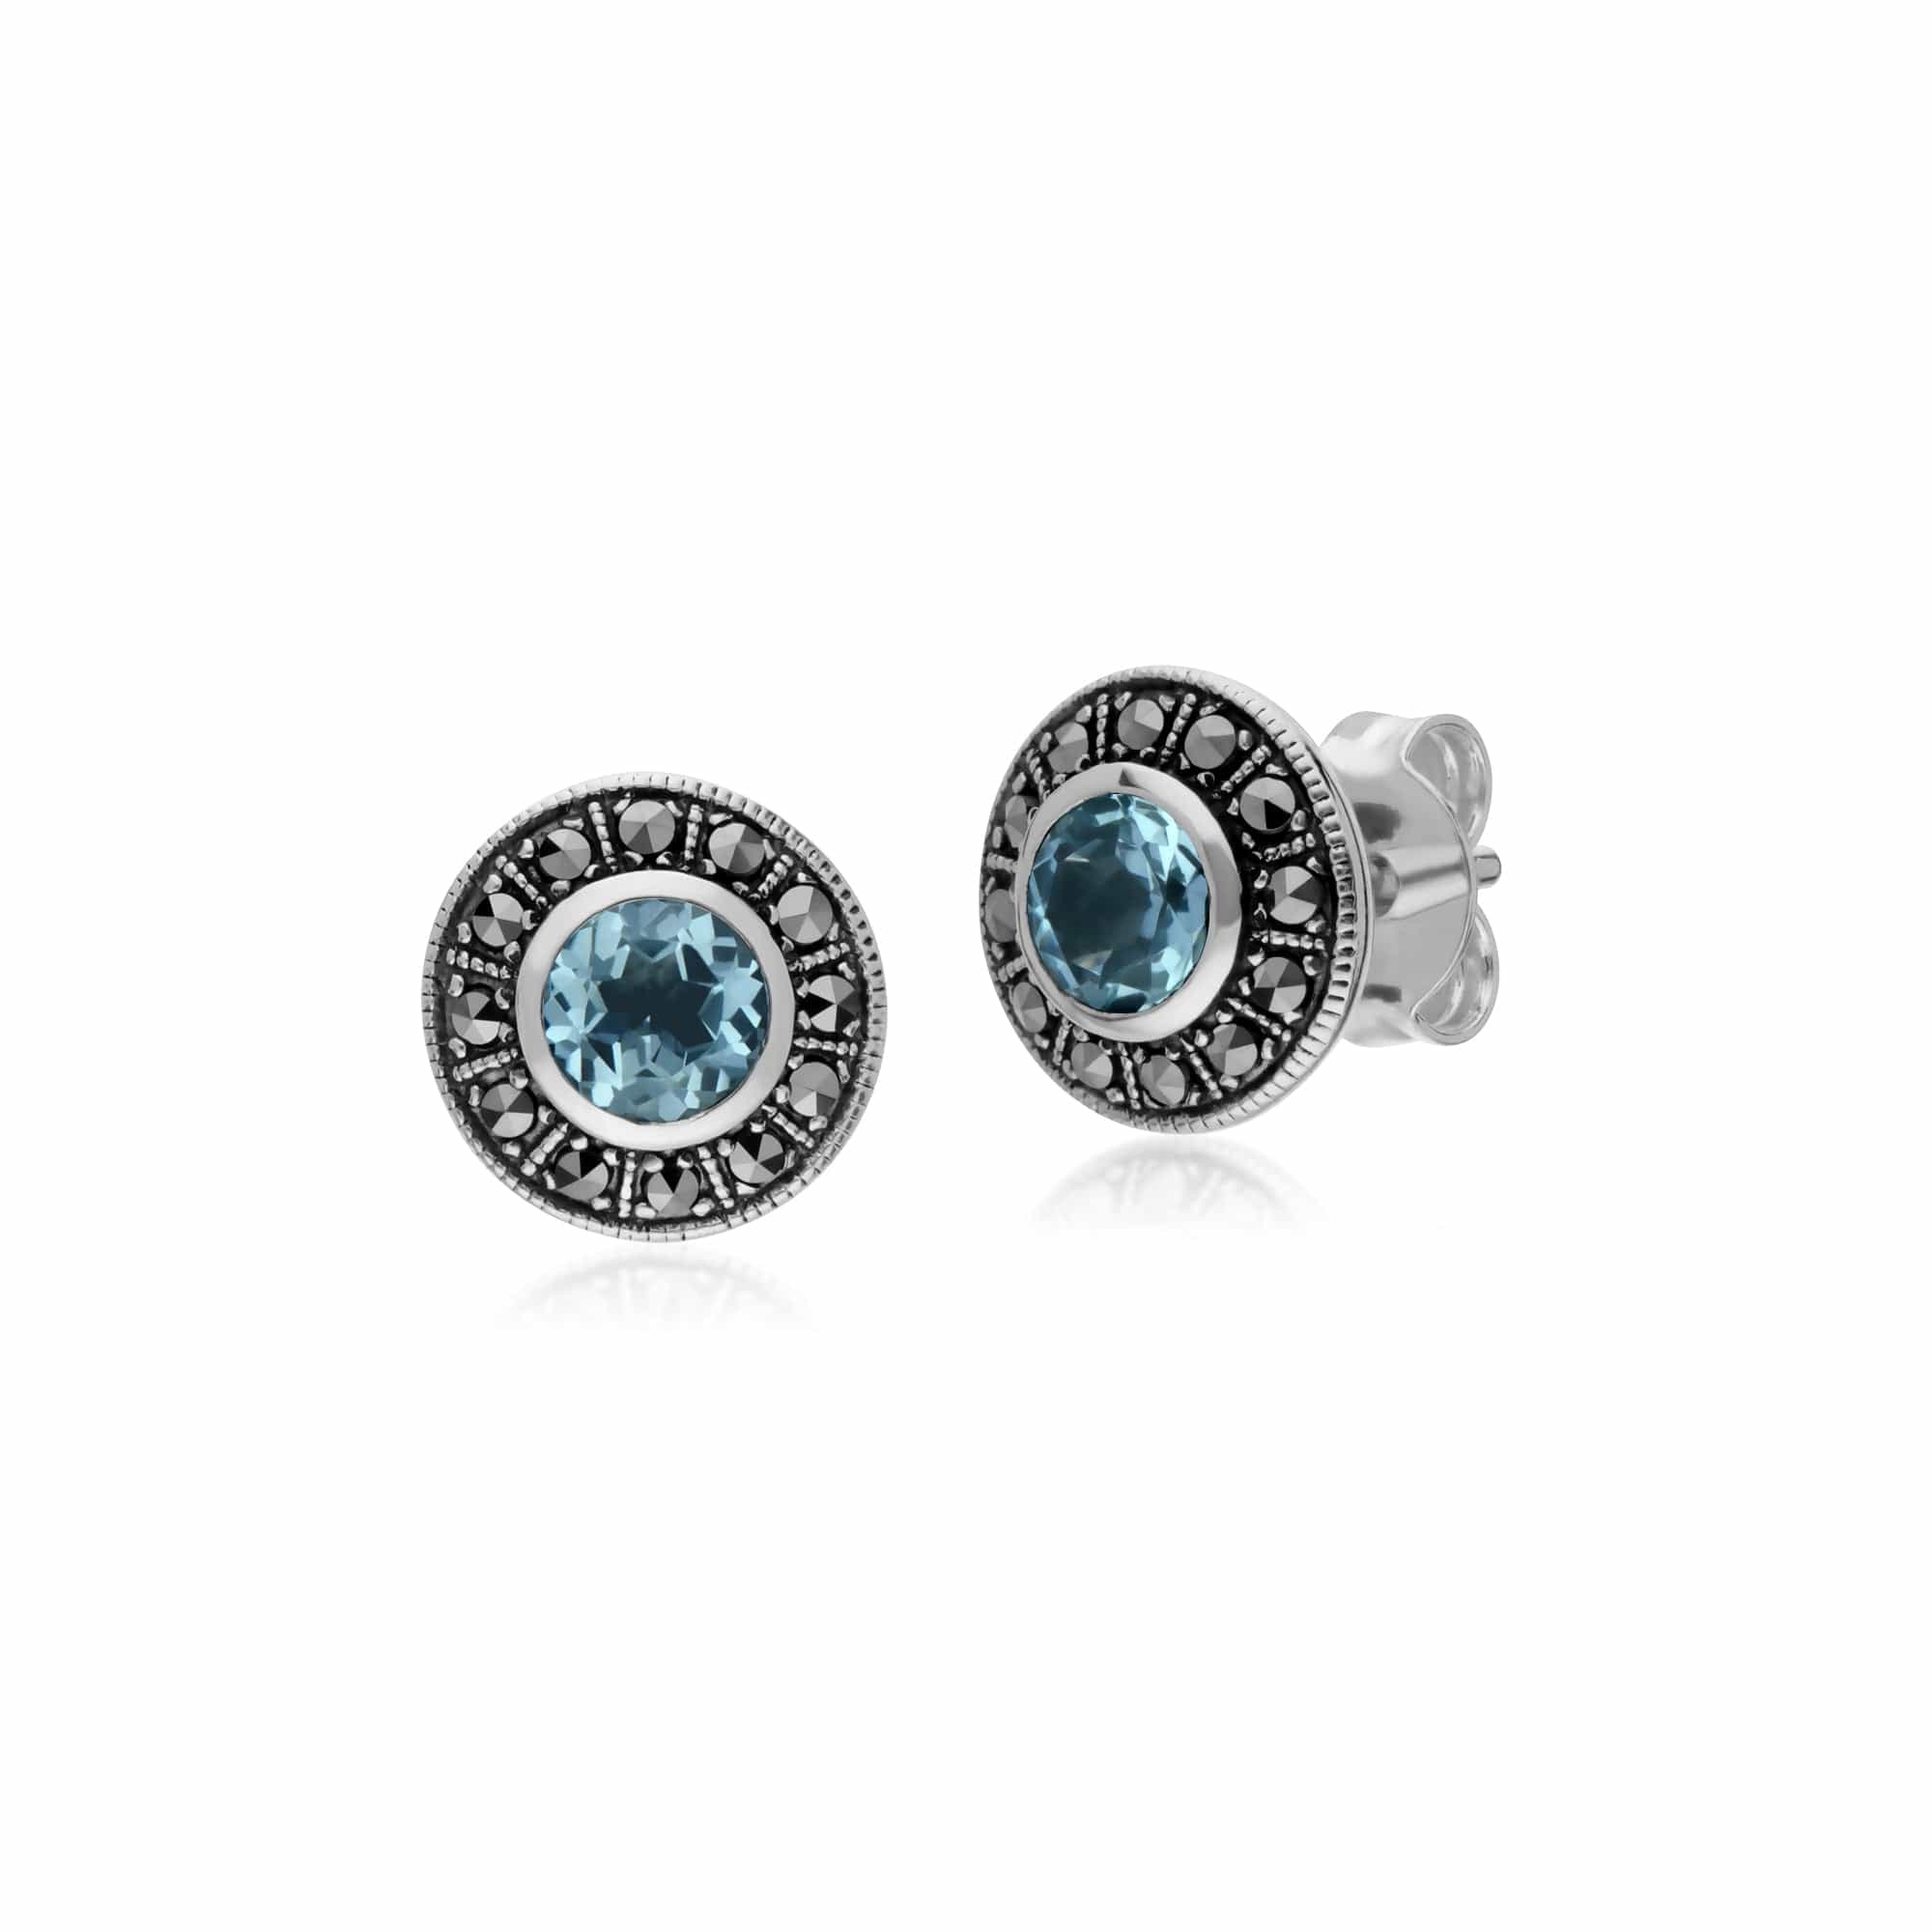 214E872702925-214R605701925 Art Deco Style Oval Blue Topaz and Marcasite Cluster Stud Earrings & Ring Set in 925 Sterling Silver 2